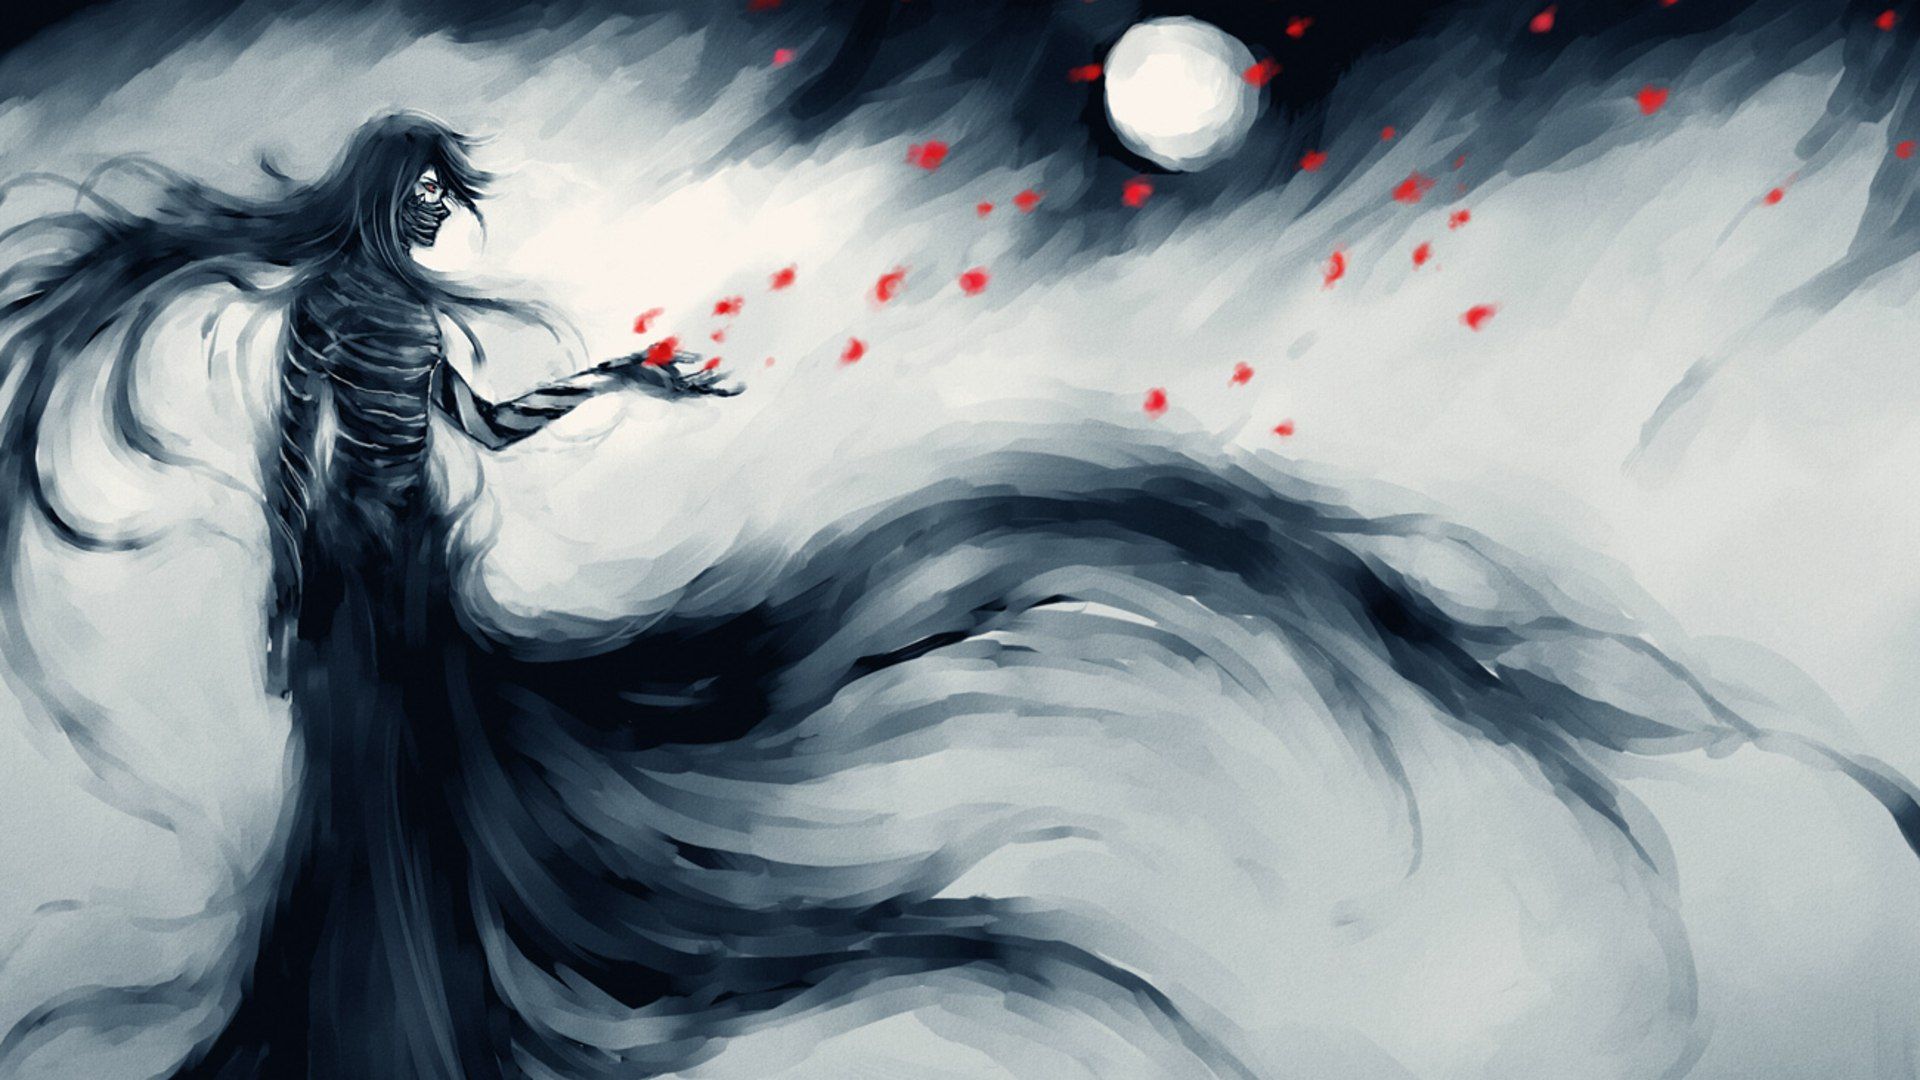 Bleach wallpaper 1920x1080 - High Quality and other